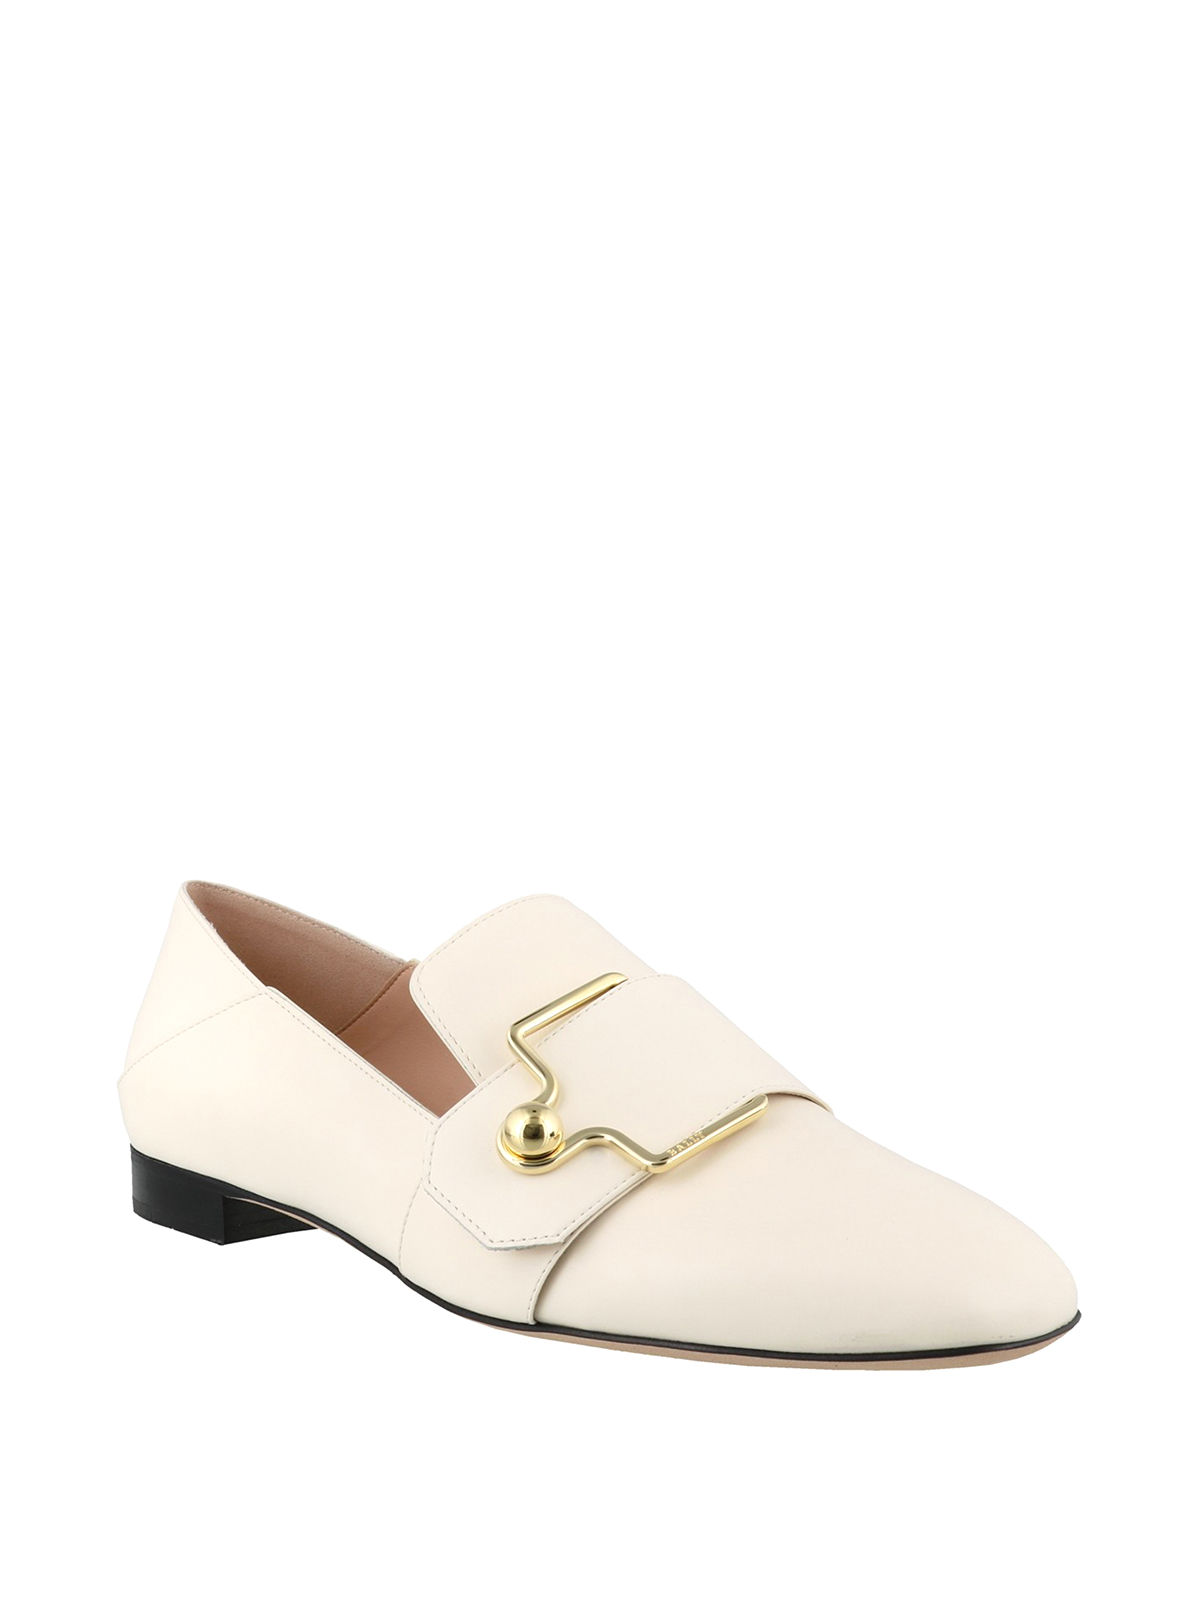 Loafers & Slippers Bally - Maelle white loafers - 6228048 | iKRIX.com